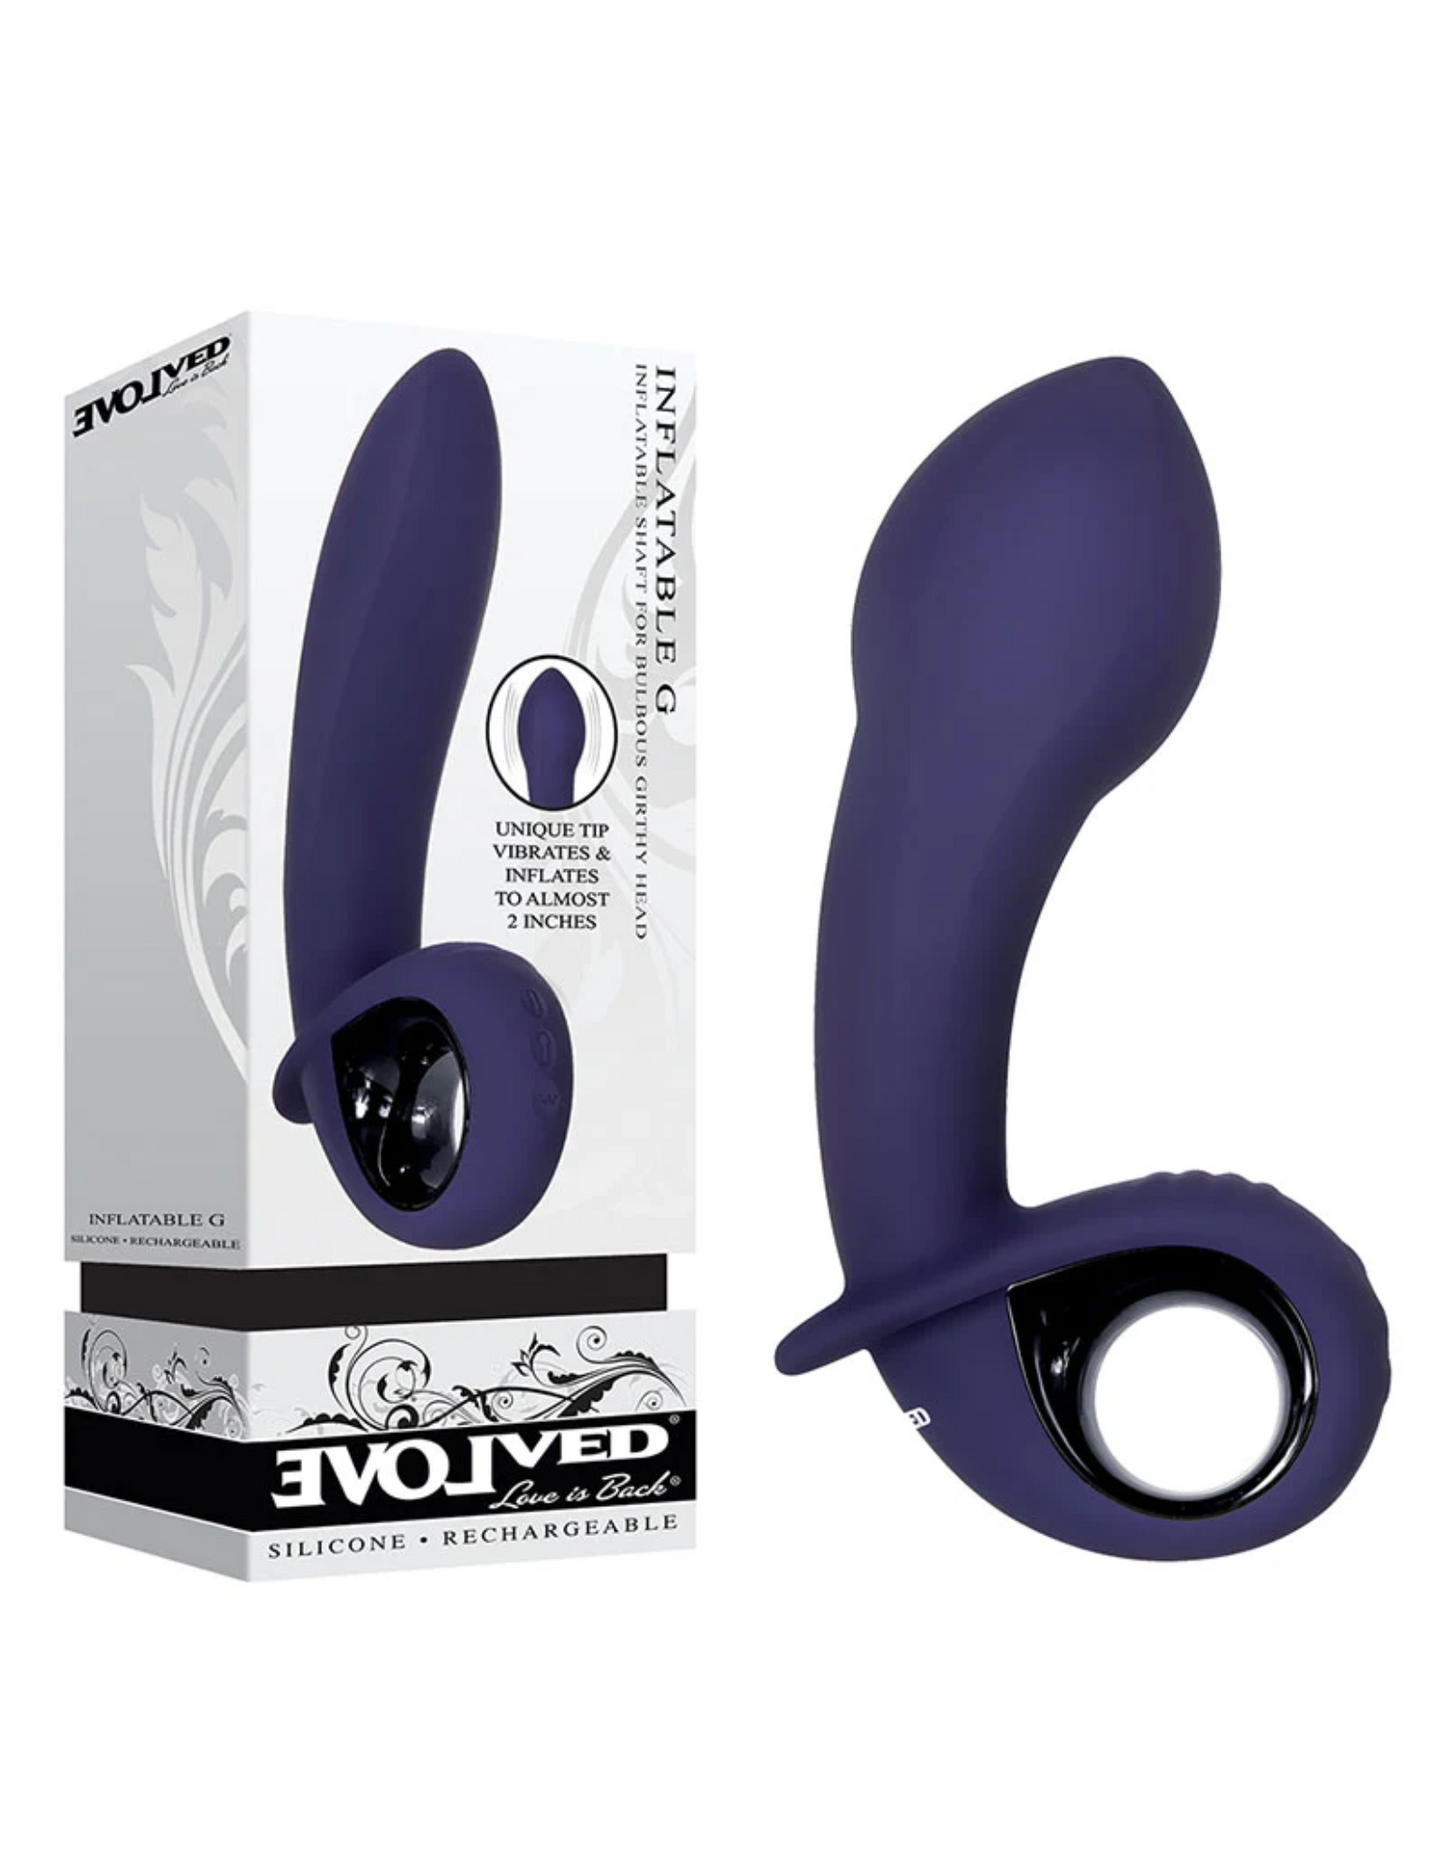 Photo shows the Inflatable G from Evolved Novelties (inflated) next to its box.